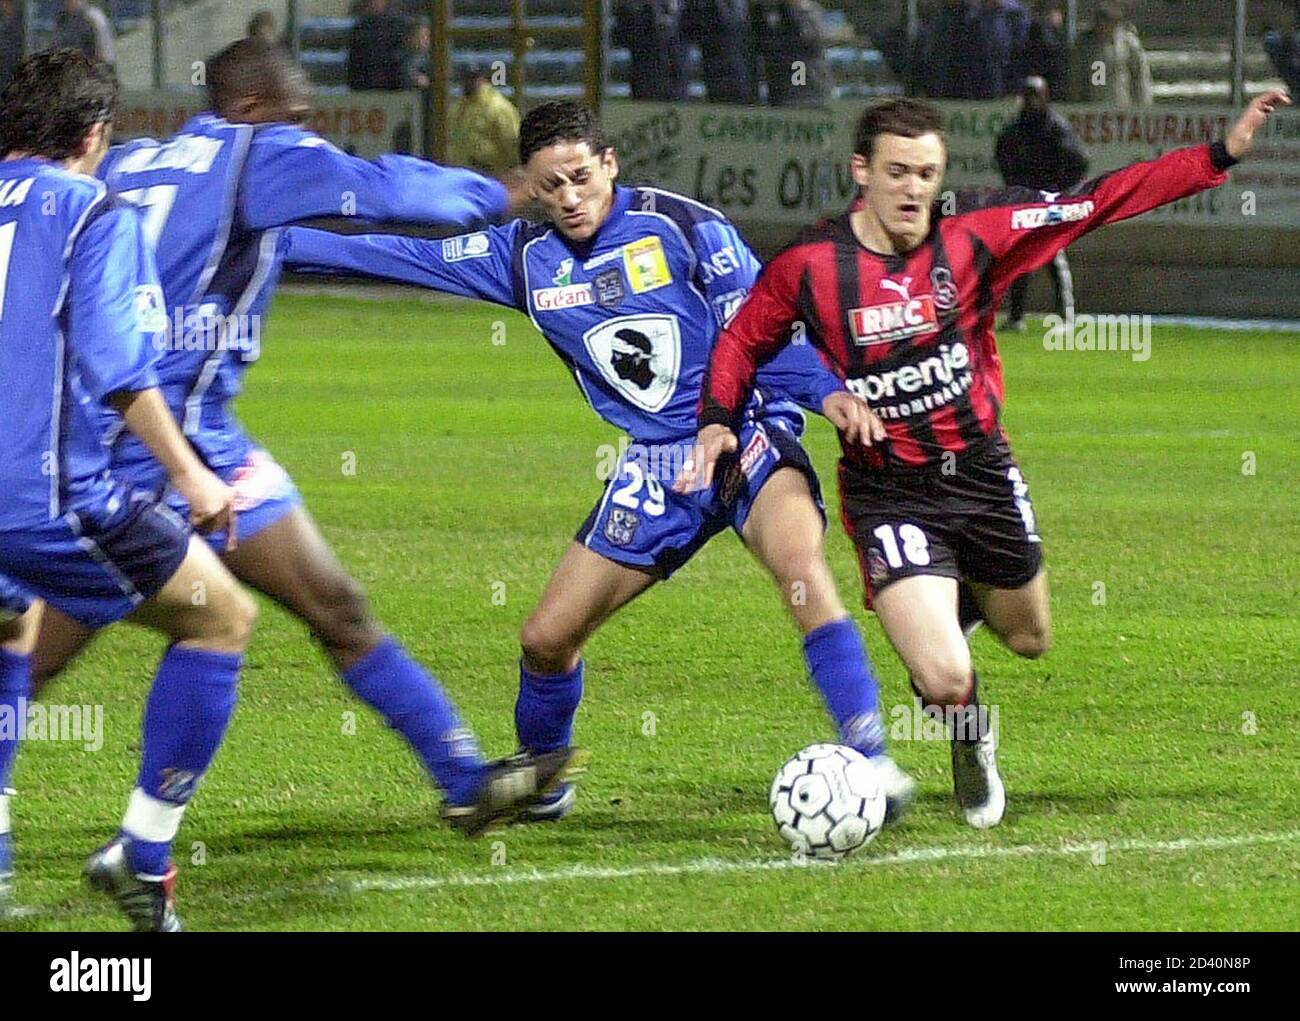 OGC Nice's Sebastien Roudet (R) challenges Chaouki Ben Saada (C) of Bastia  in their French soccer